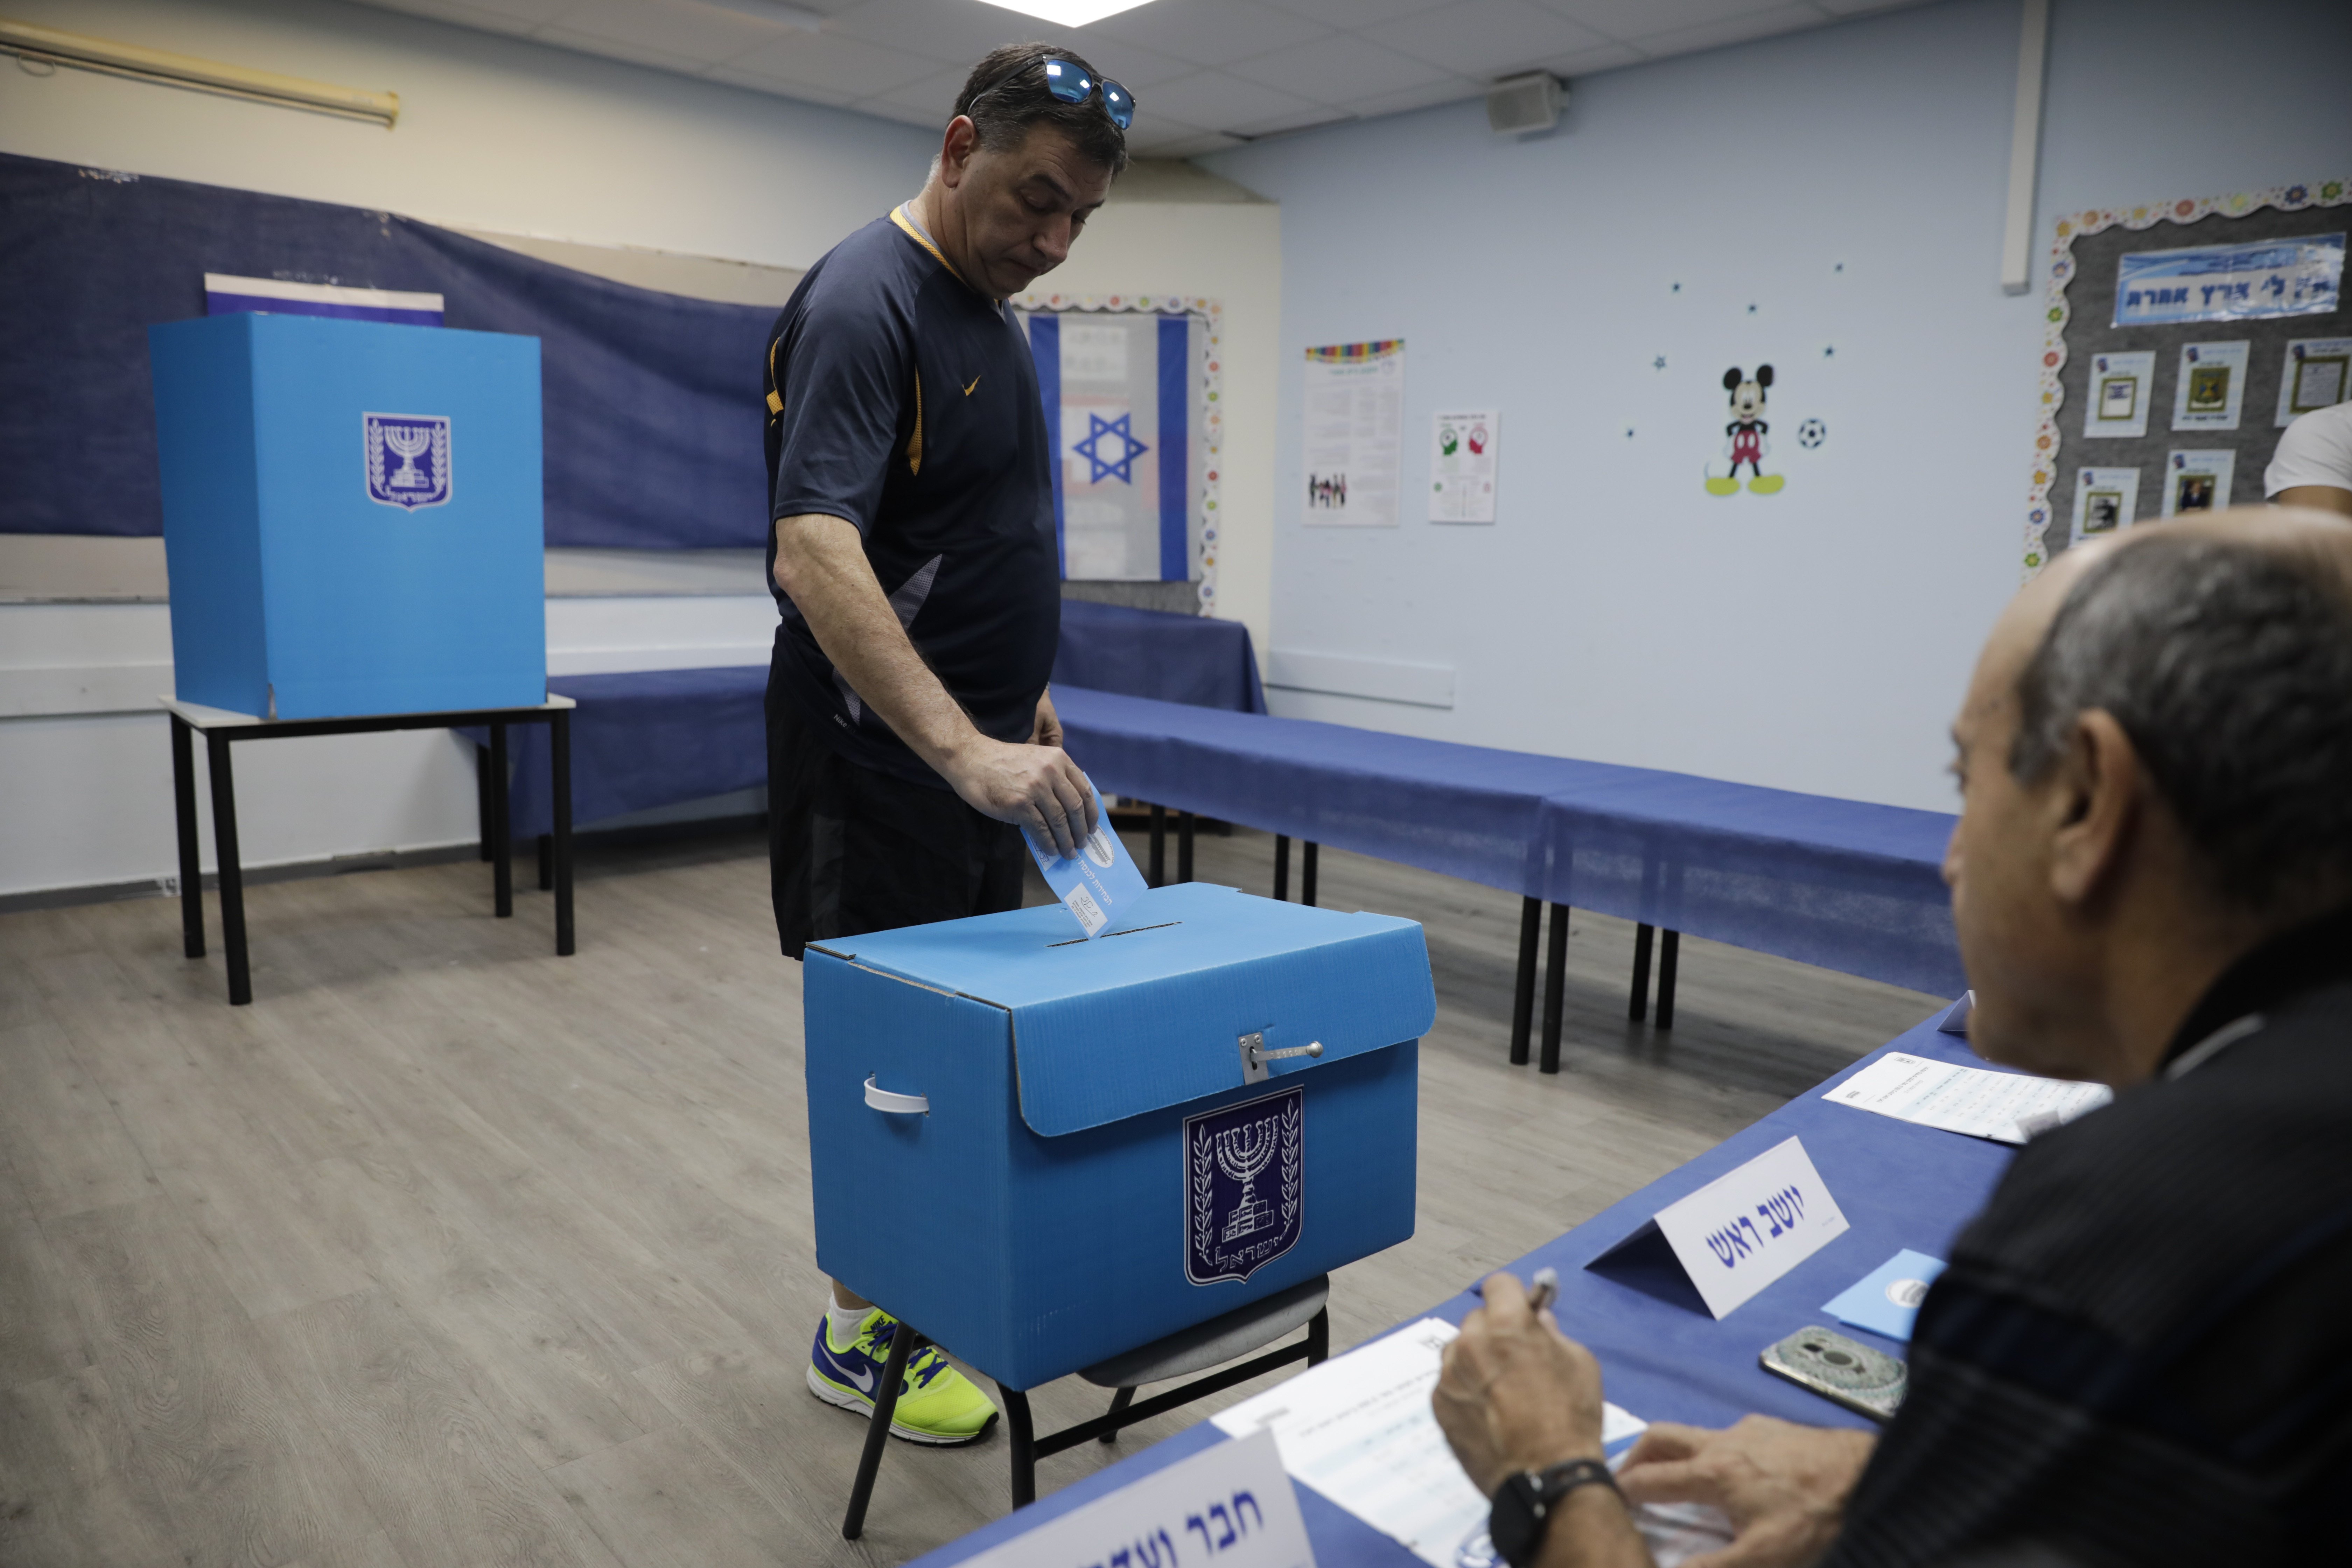 A man votes in Rosh Haayin, Israel, Tuesday, Sept. 17, 2019. Israelis began voting Tuesday in an unprecedented repeat election that will decide whether longtime Prime Minister Benjamin Netanyahu stays in power despite a looming indictment on corruption charges. (AP Photo/Sebastian Scheiner)